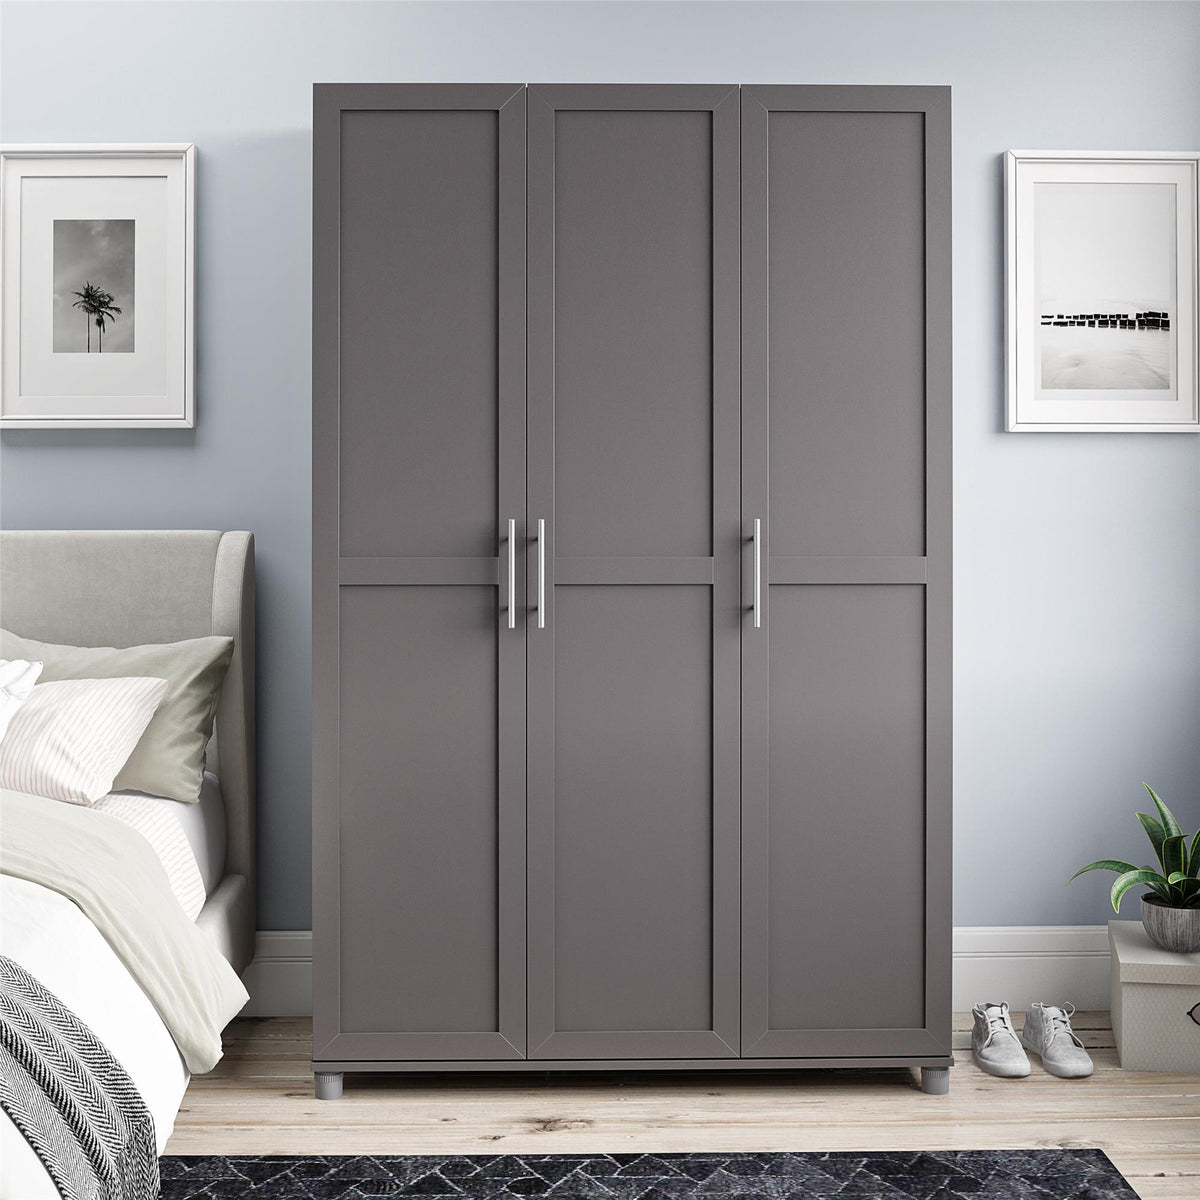 Room & Joy Camberly 3 Door Wall Cabinet with Hanging Rod Graphite Gray